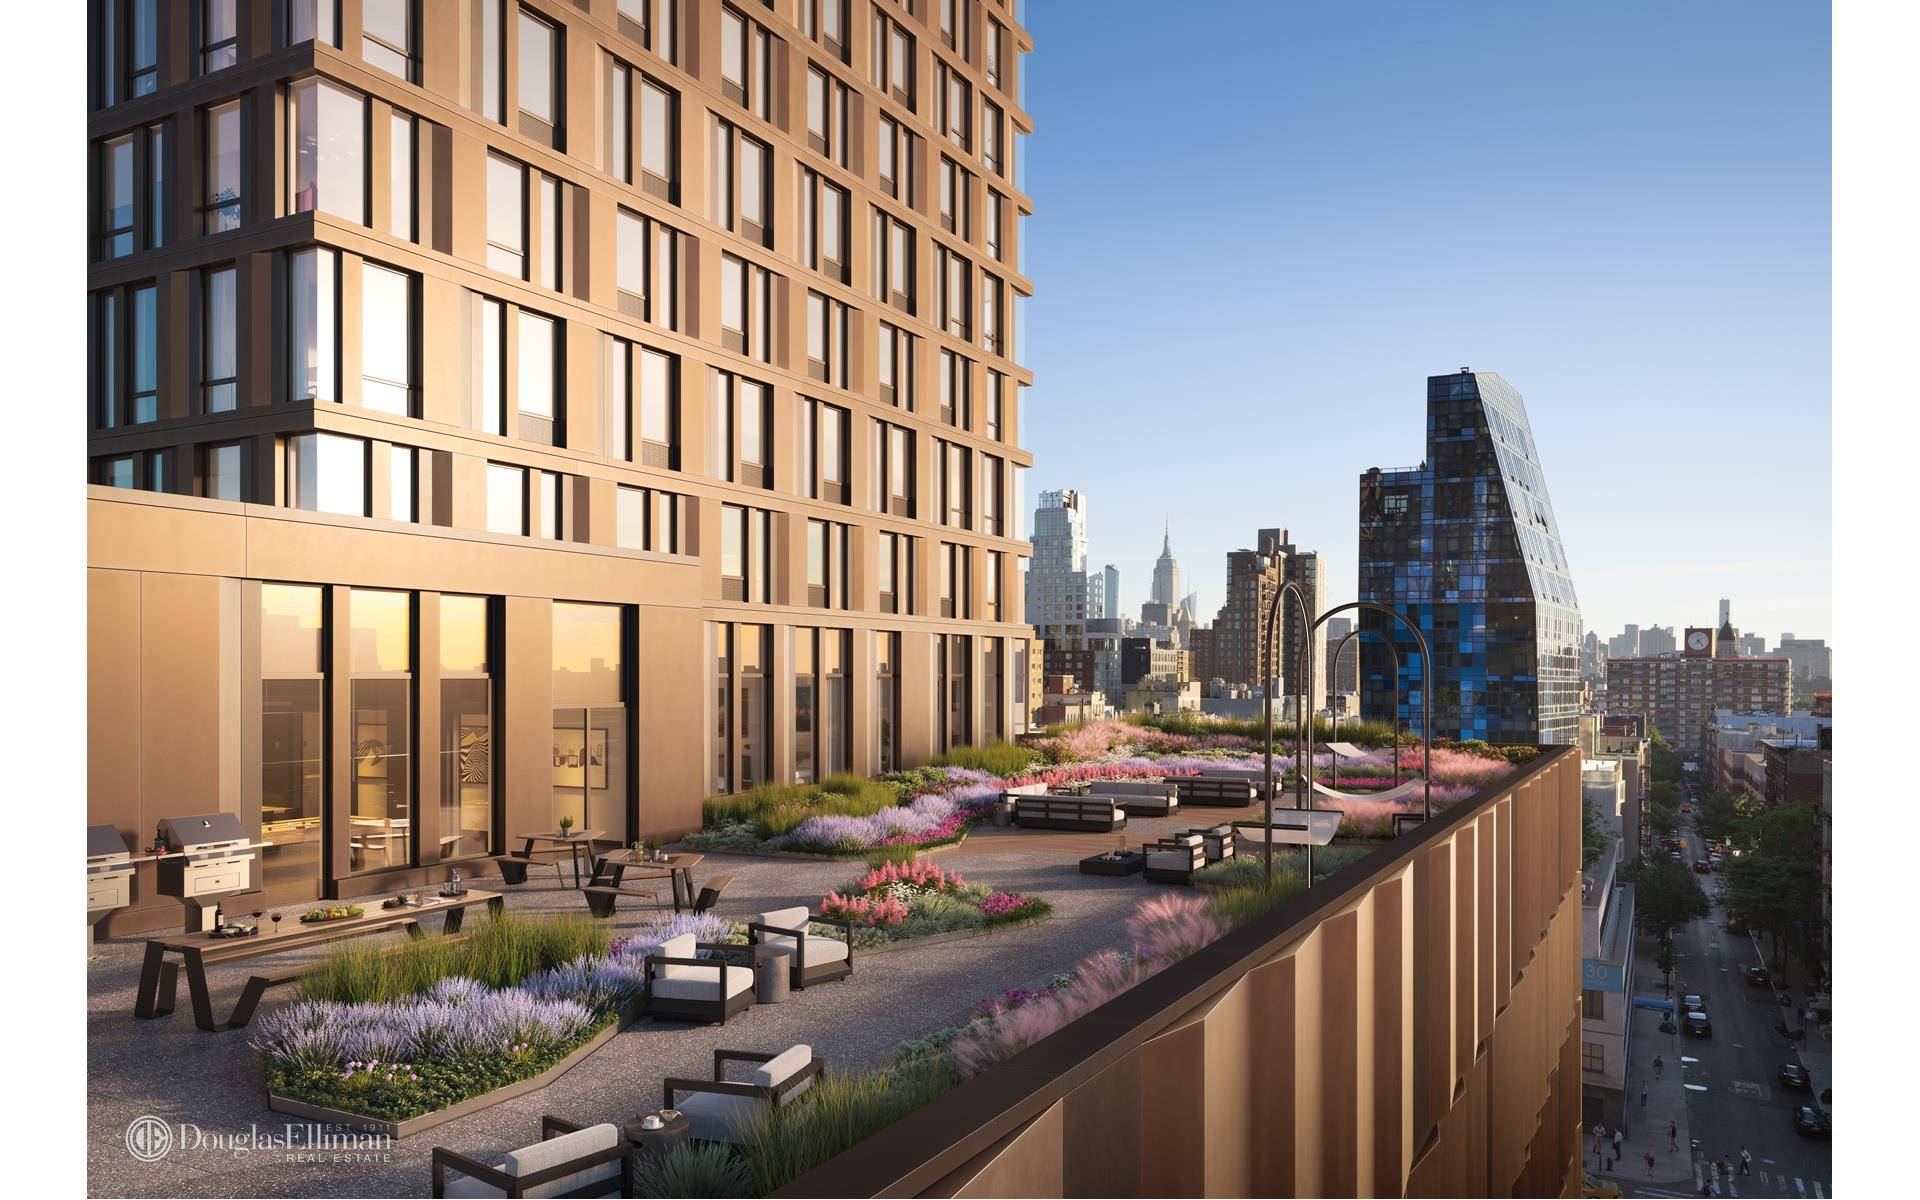 NOW LEASING THREE MONTHS FREE ON A 27 MONTH LEASE The Lower East Side has been continuously evolving since it's pushcart past to the progressive culture today.